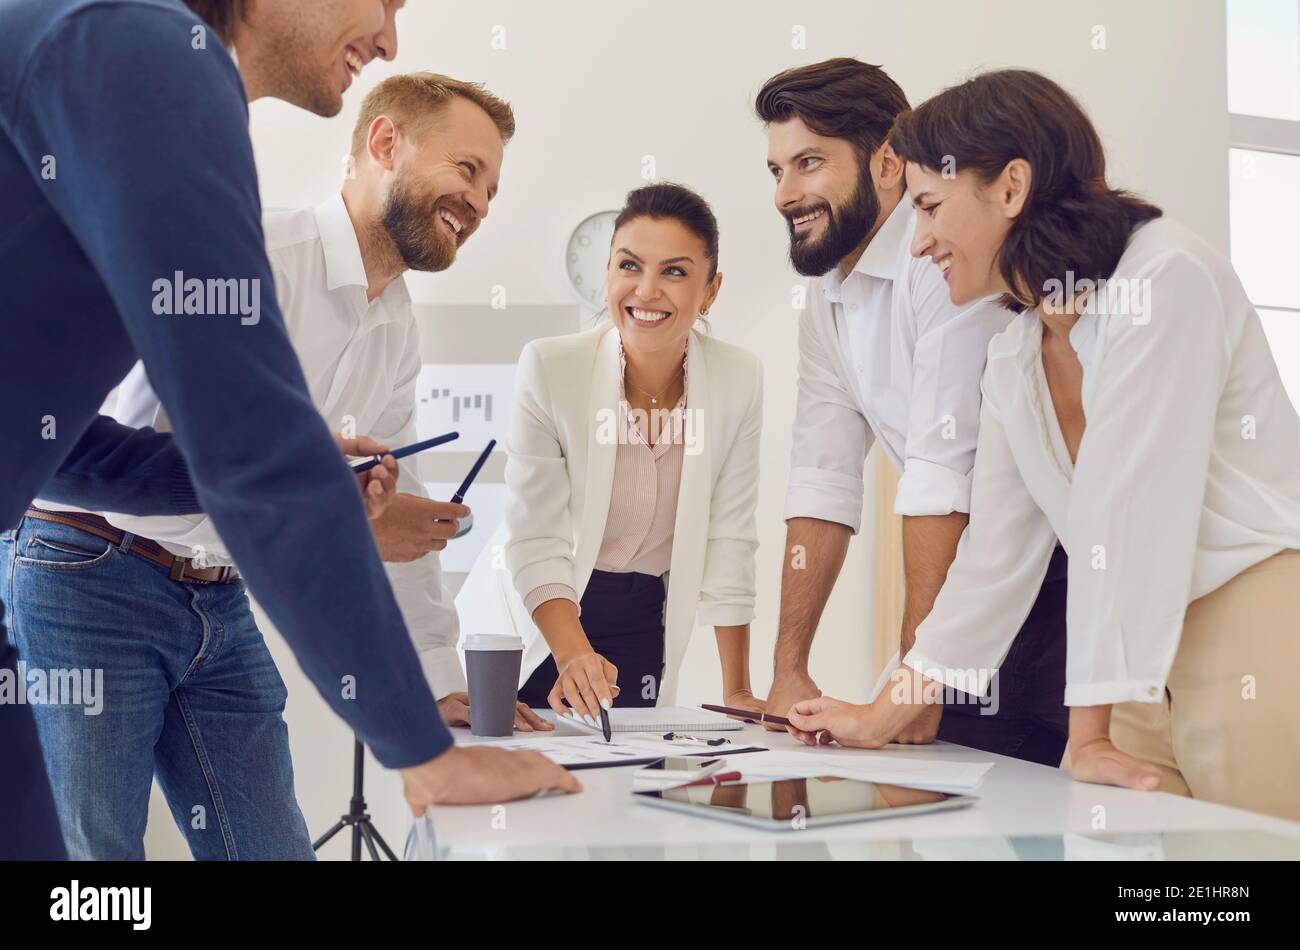 Group of young smiling business people discussing new project or startup idea during meeting together Stock Photo